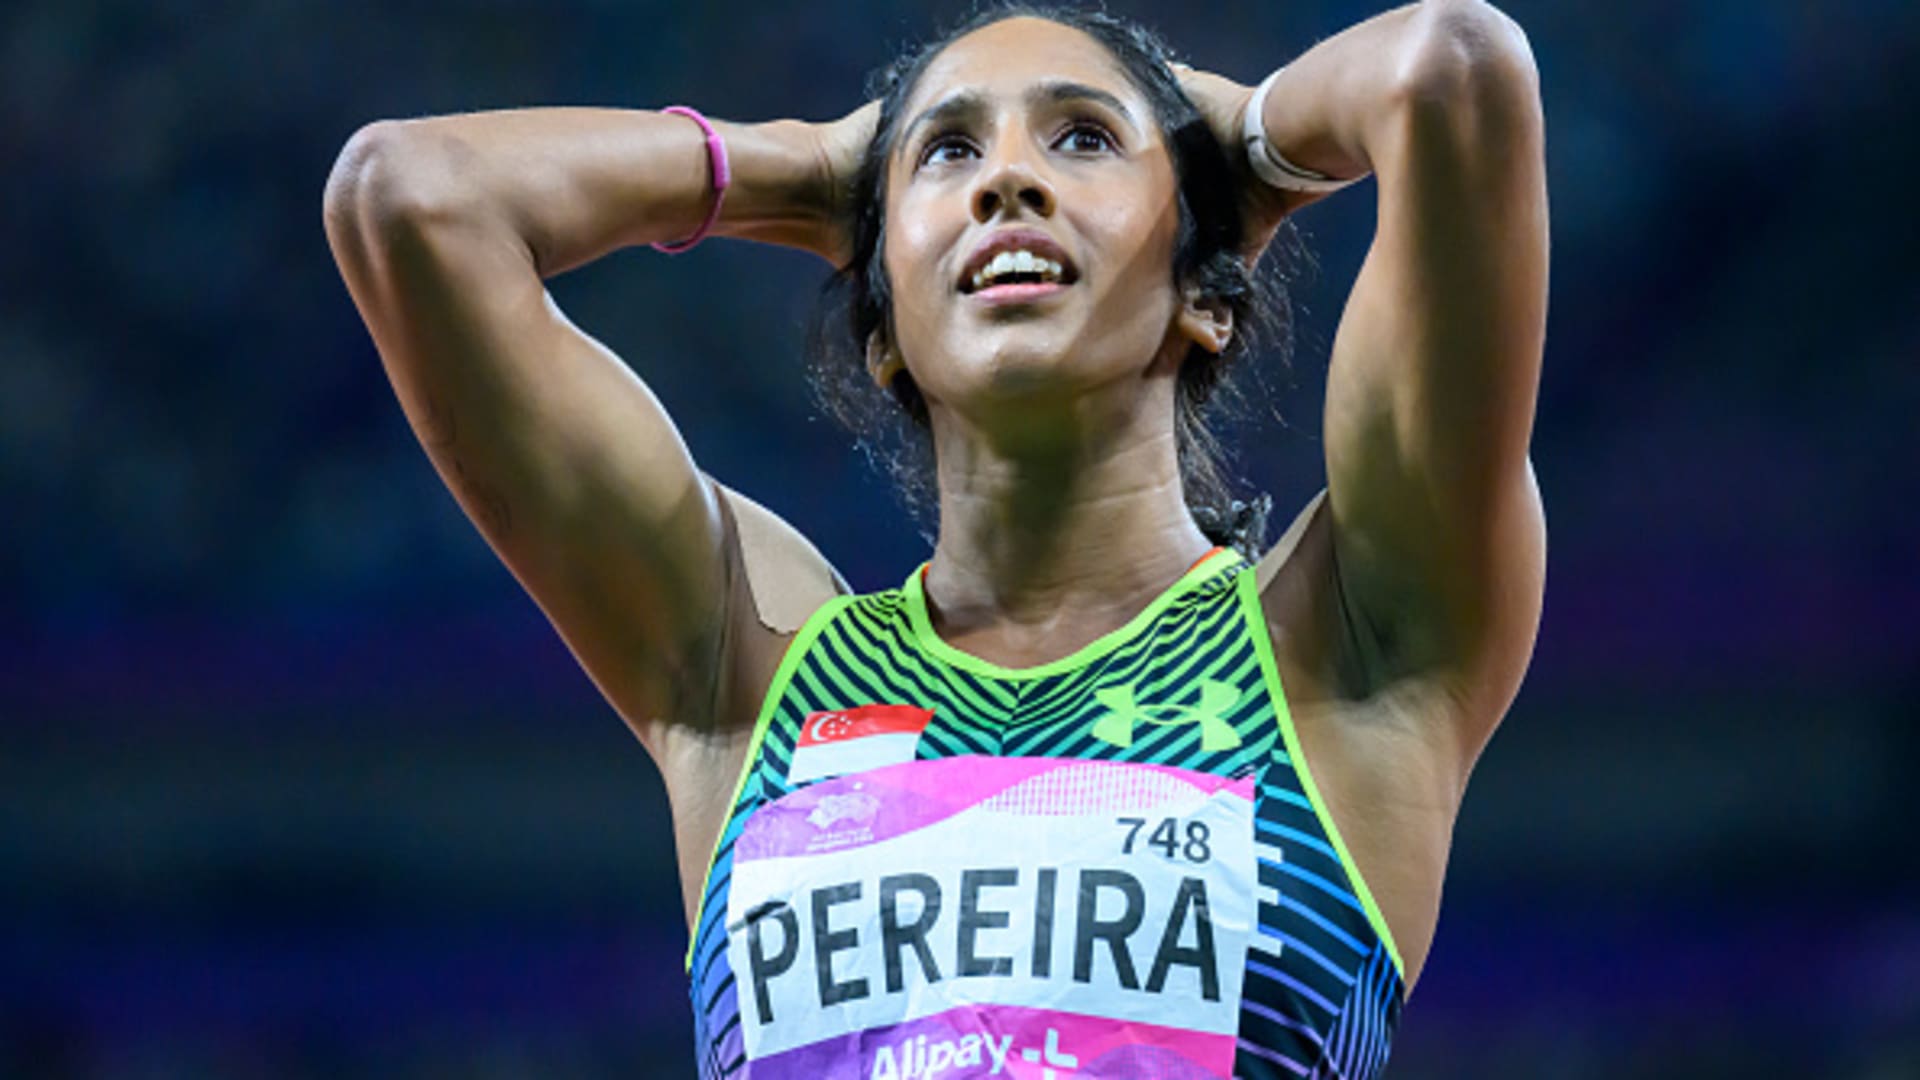 Singapore’s Shanti Pereira on disappointments and her Olympic dream